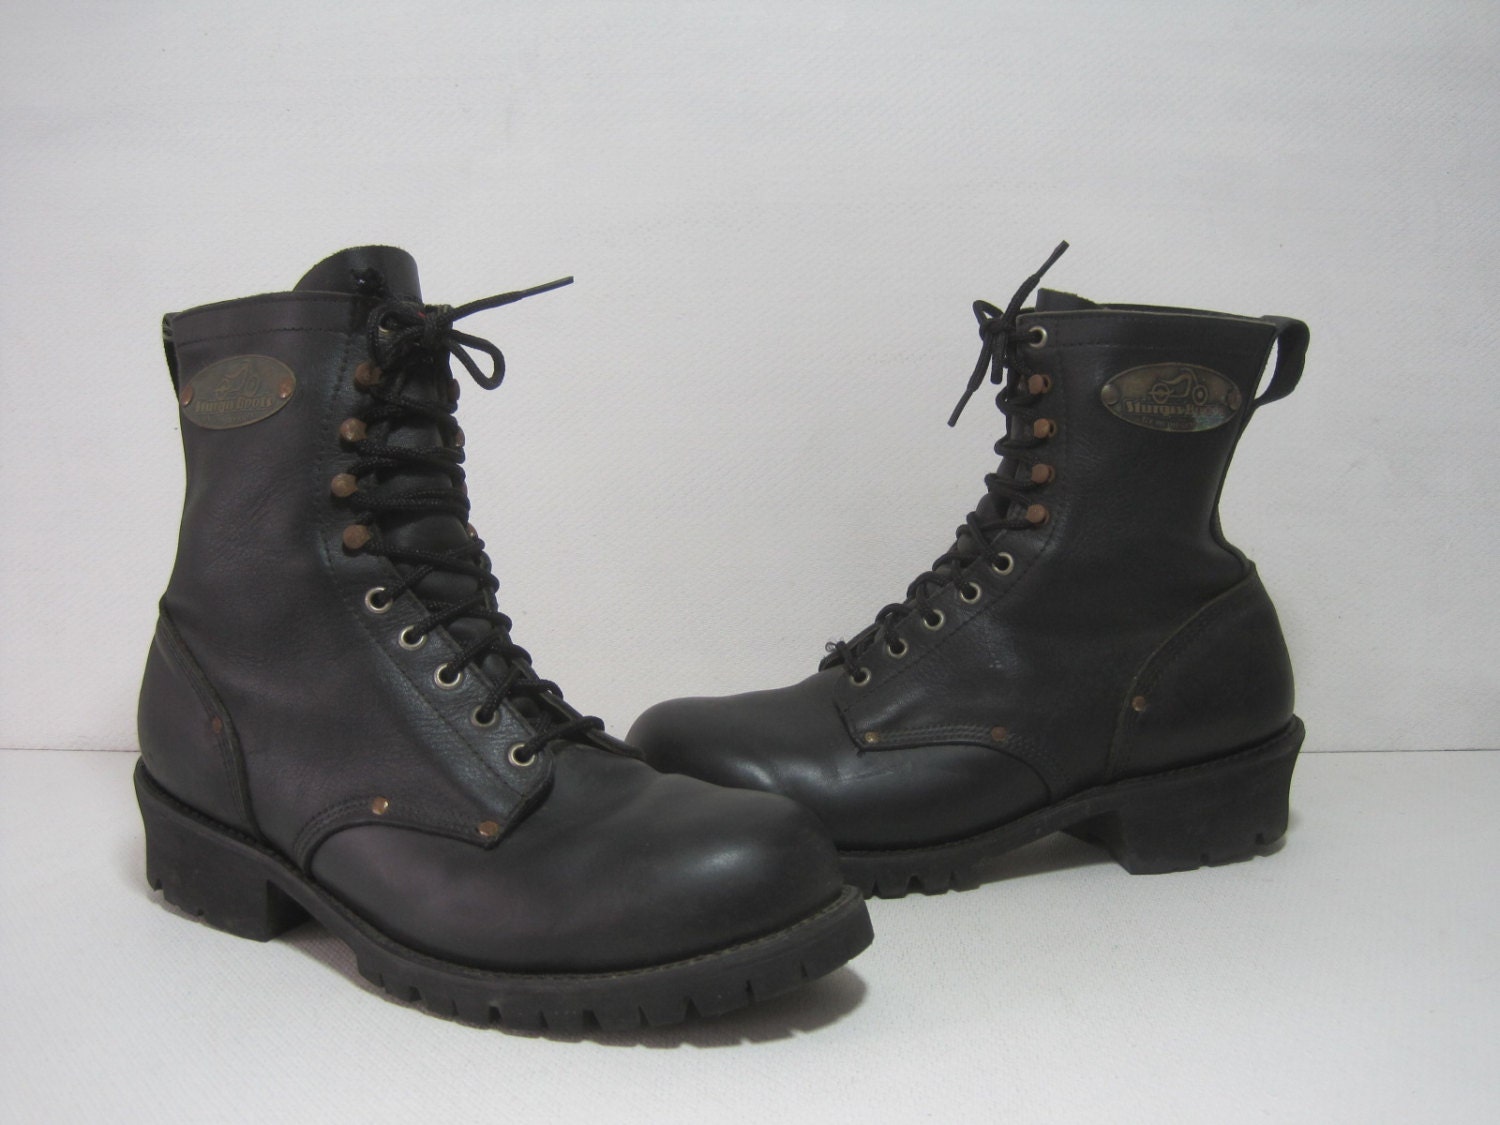 STURGIS BOOTS by Weinbrenner Motorcycle Biker Road Boots Size: